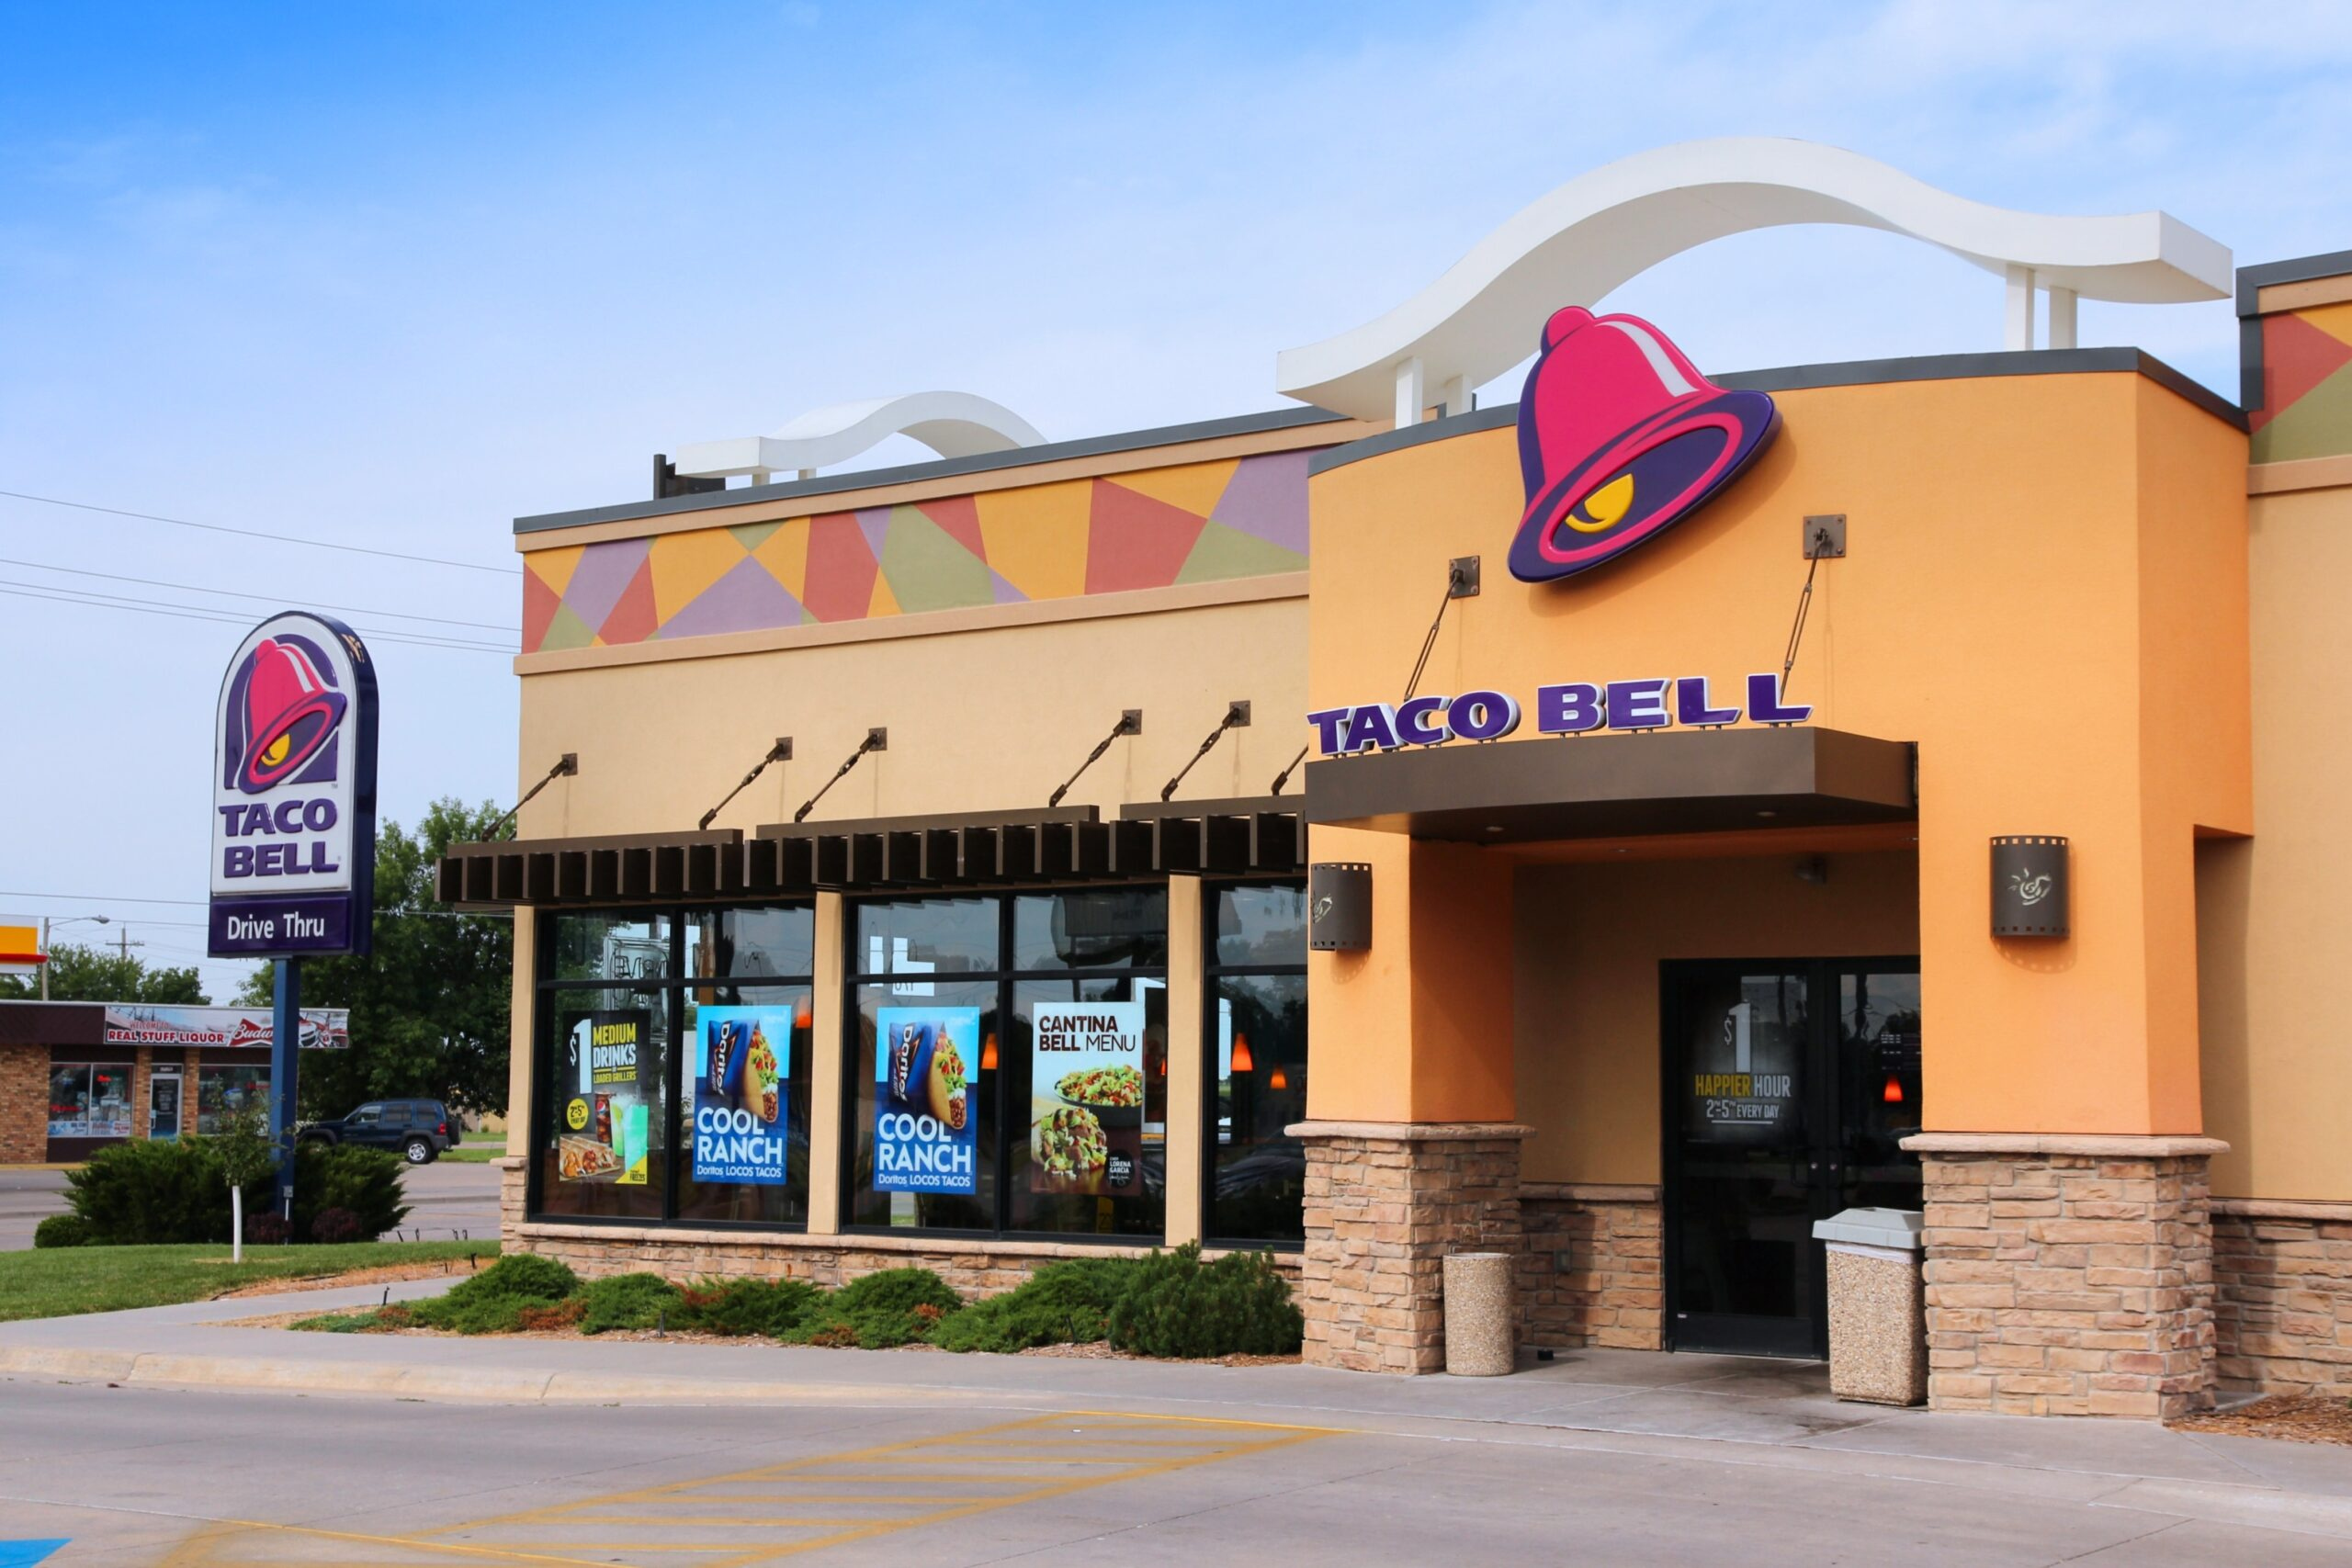 Taco Bell Franchise Employee Retention Credit with regard to Taco Bell W2 2021 Former Employee